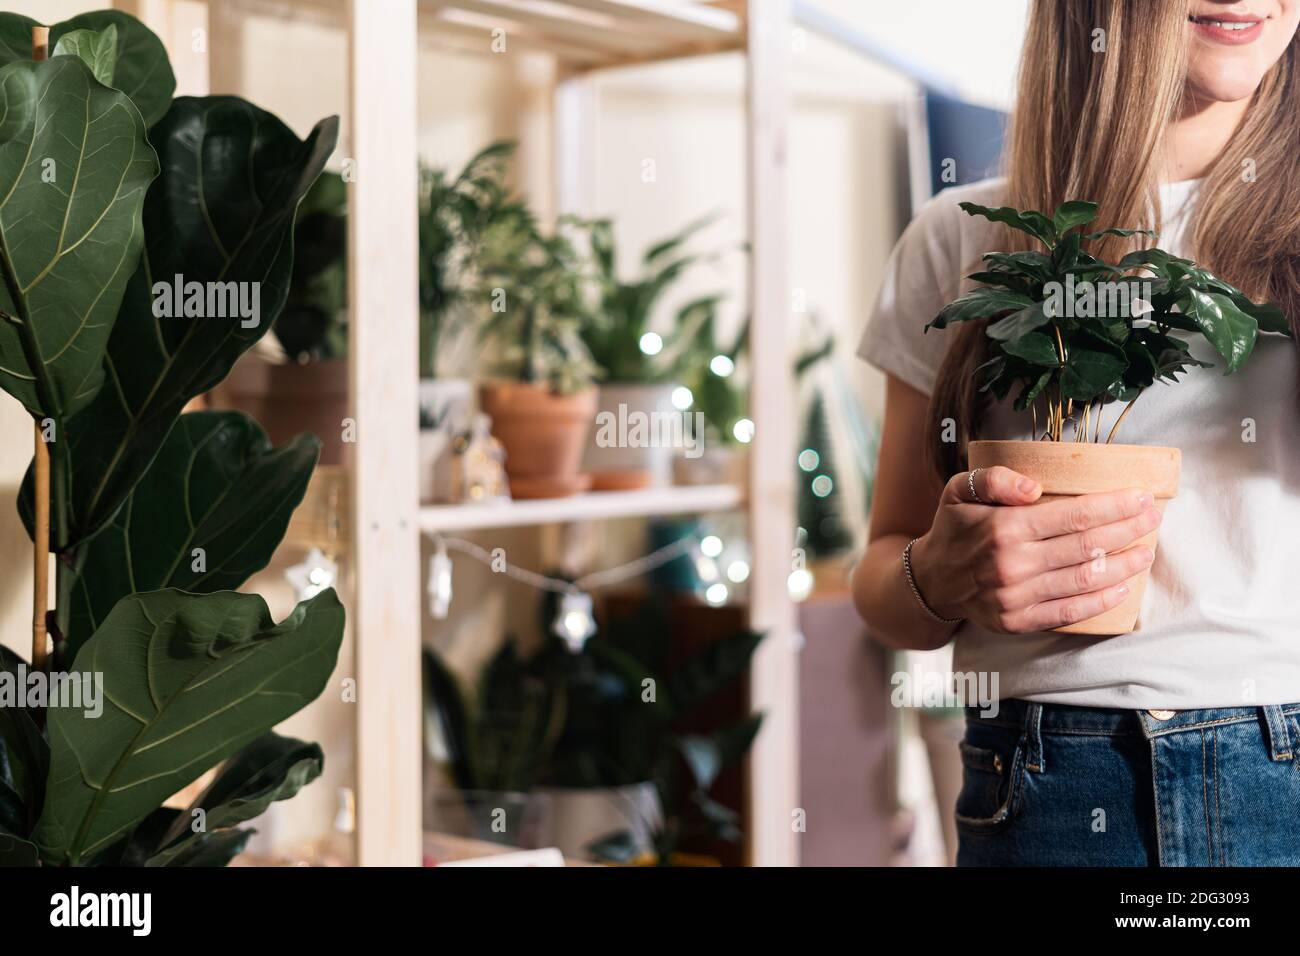 Cropped woman holding tropical plants in terracotta pot, gardening job and work for people who loves nature. Concept of garden and interior decoration Stock Photo